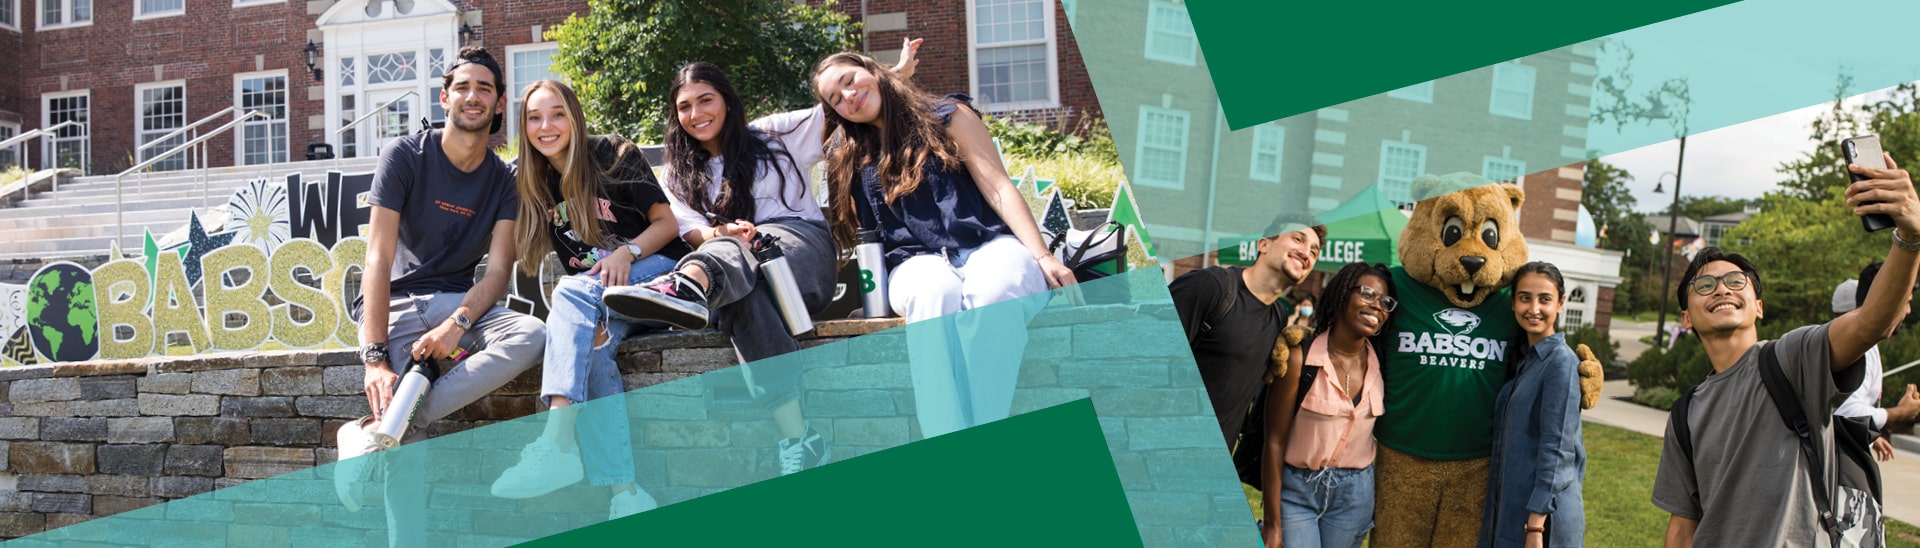 Access Babson Header Image